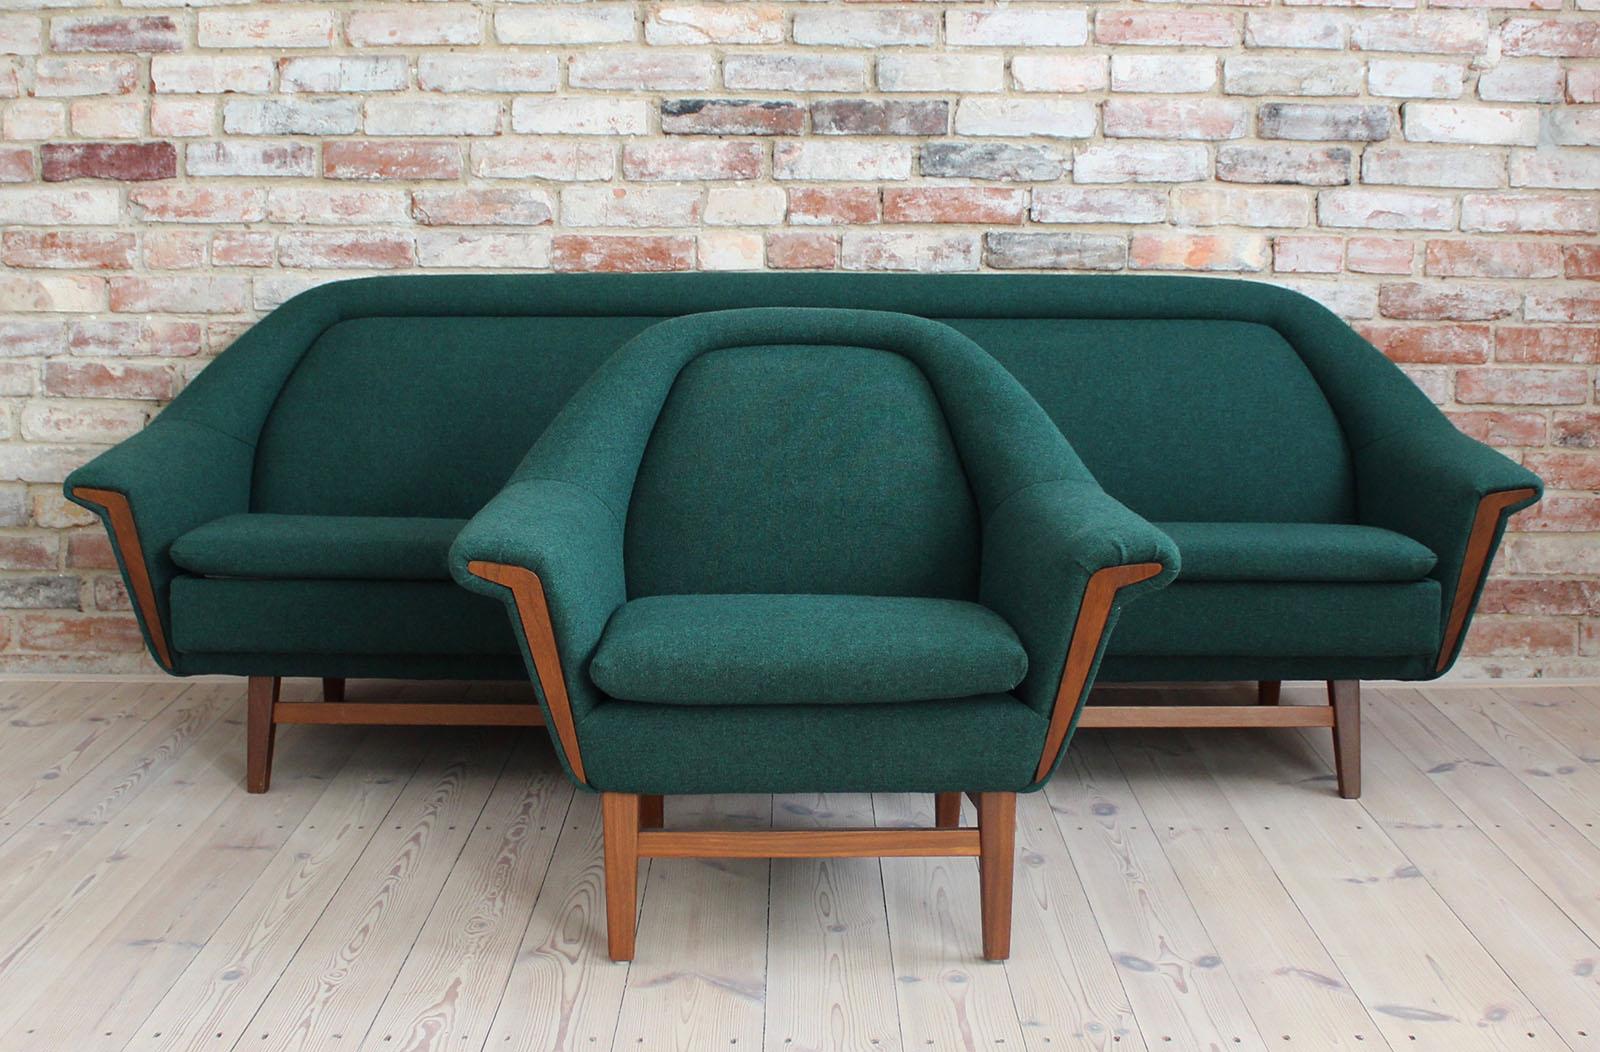 This set of furniture was produced by Holm Fabriker from Sweden in the 1960s. Like most furniture from Scandinavia, this set was also made with great care and accuracy, which we could observe throughout the renovation process. It can be transformed